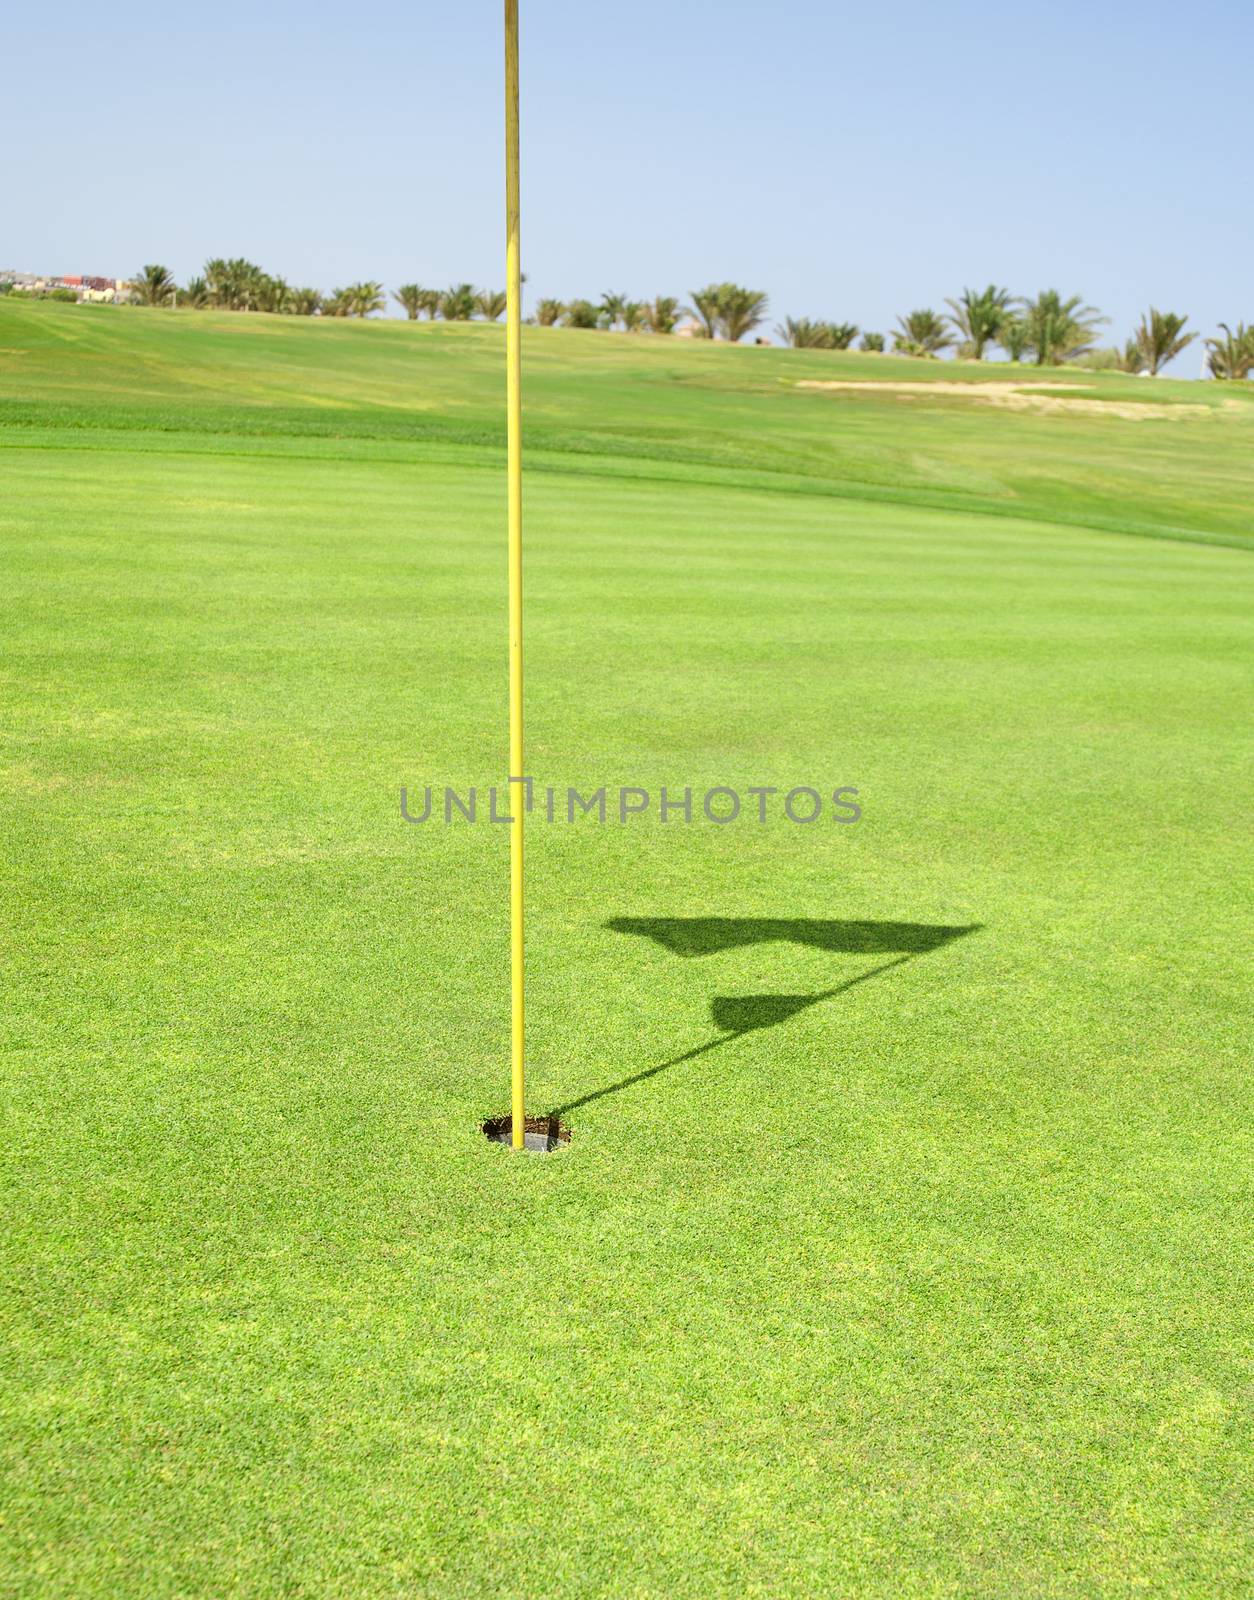 Closeup detail of a golf flag in the hole on a course green